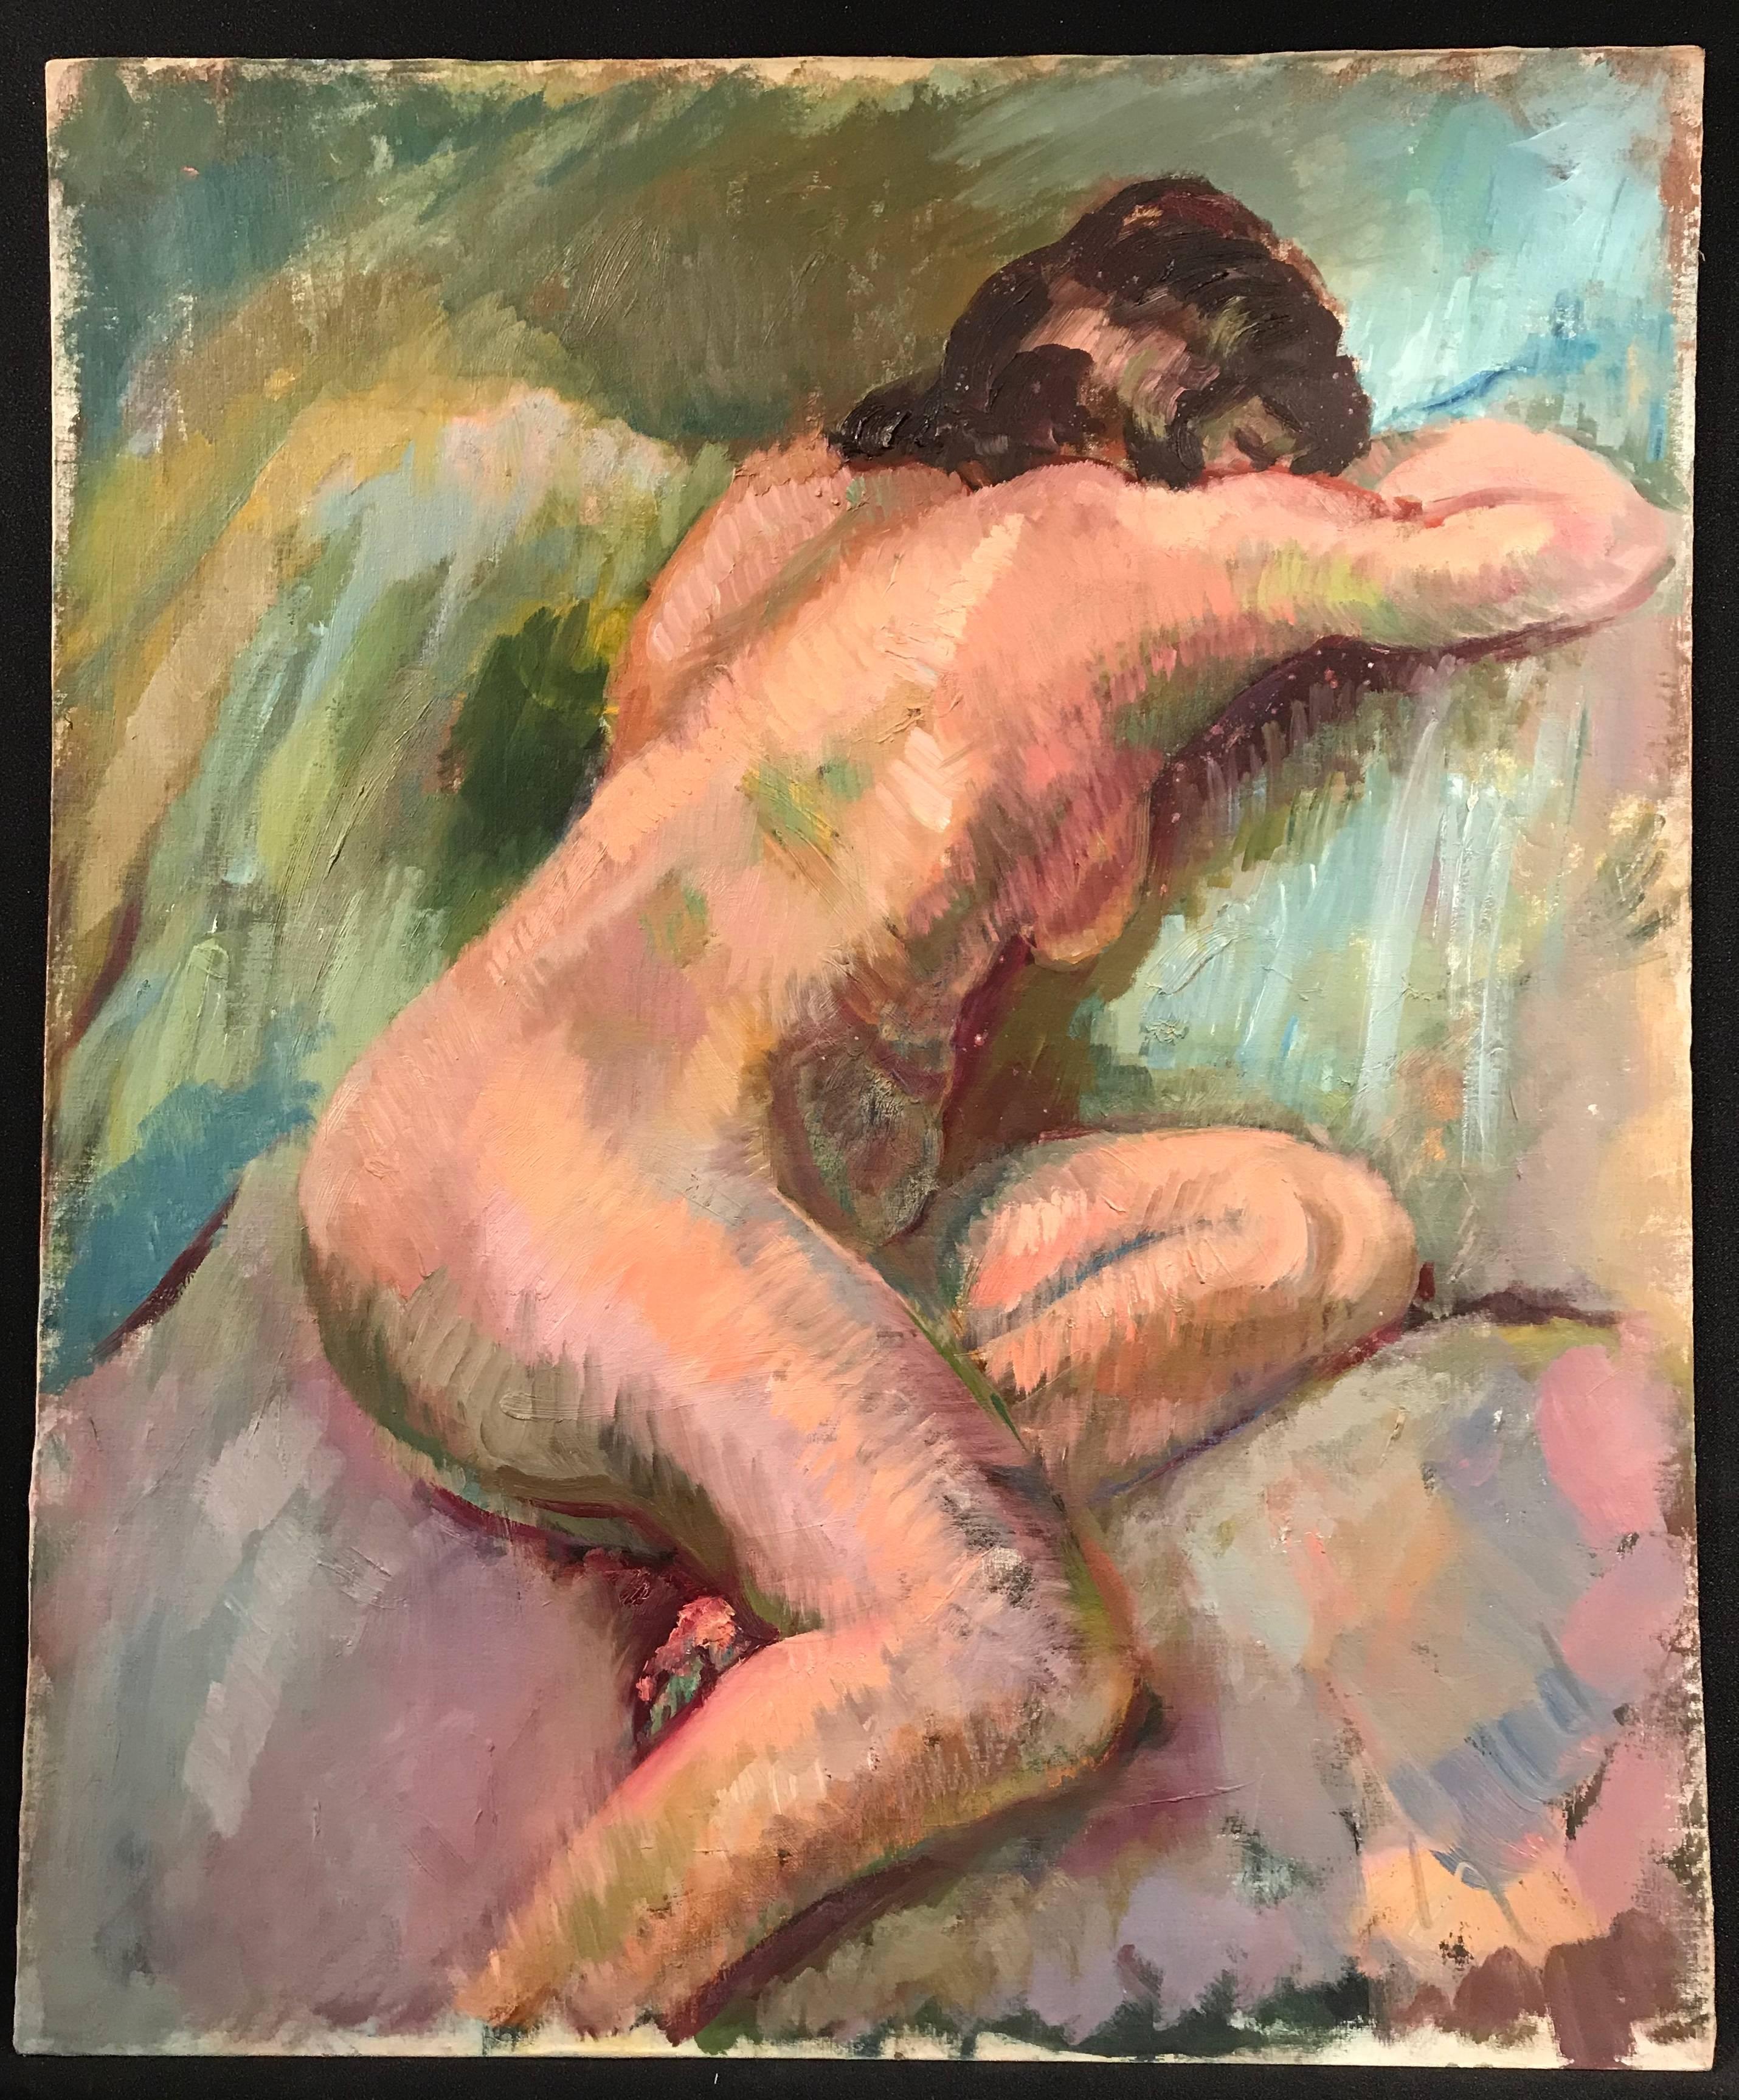 Mid 20th Century British Oil Painting The Nude Model - Brown Nude Painting by Unknown